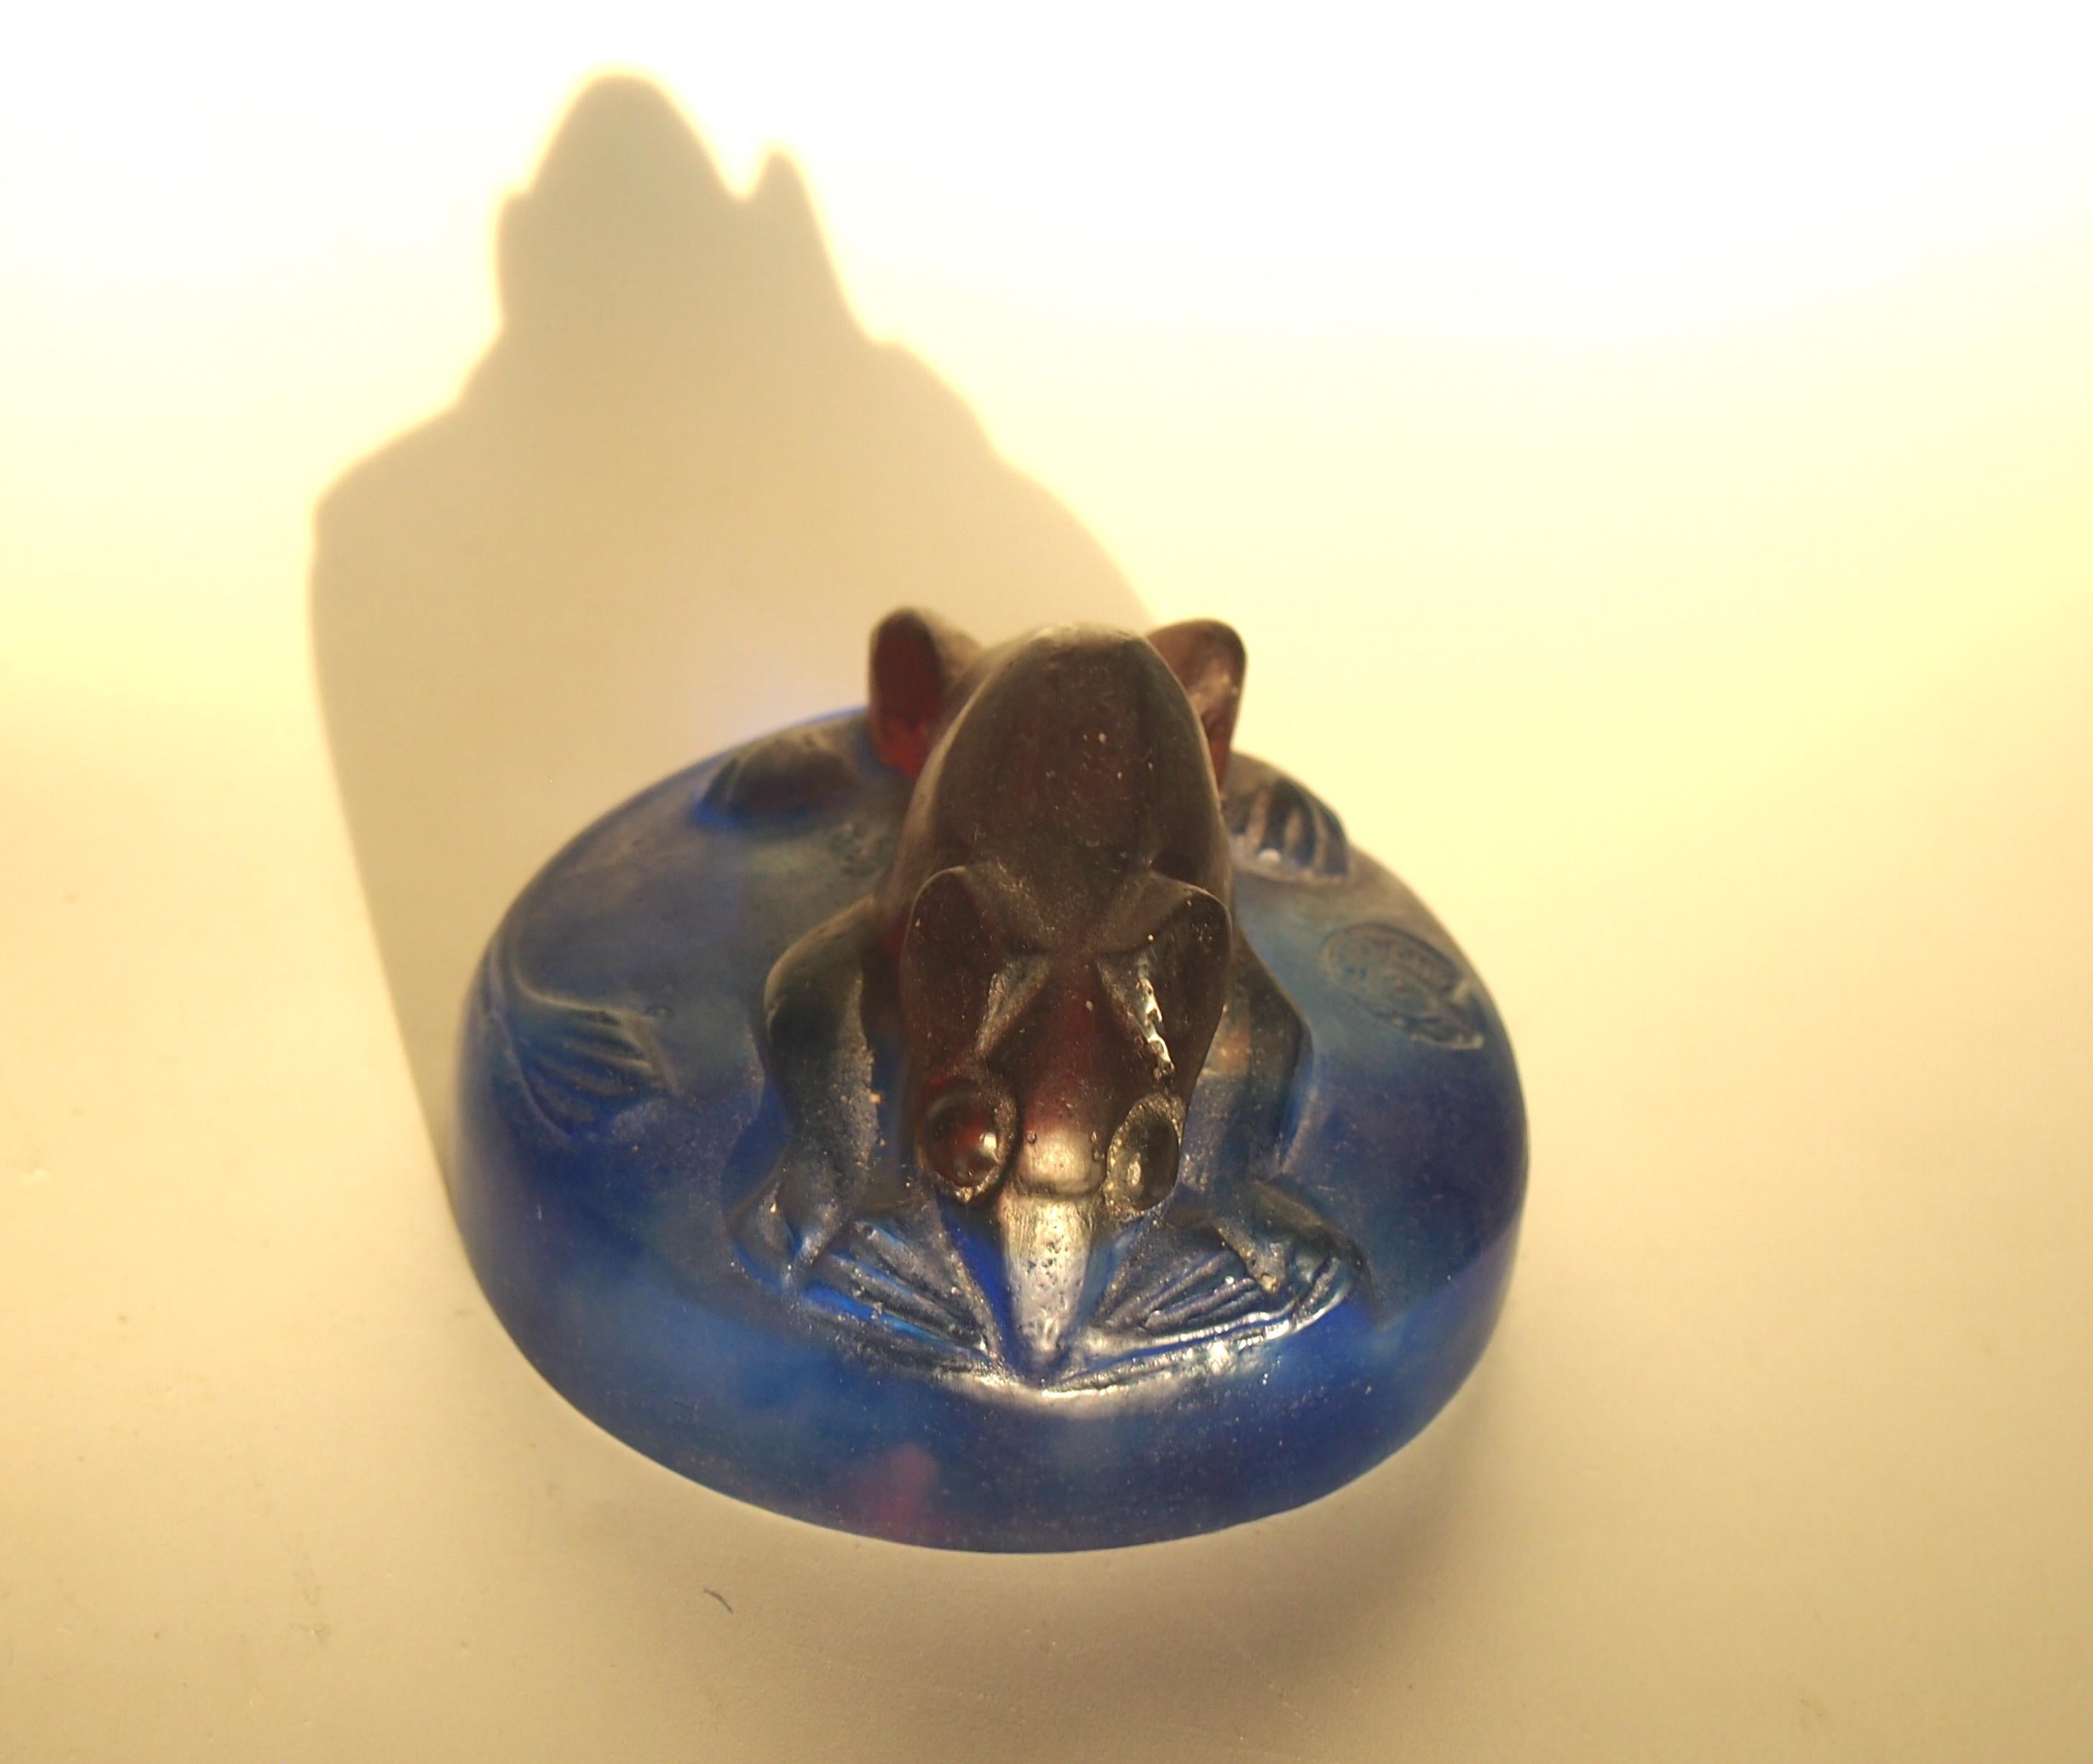 A Francois-Emile Decorchement (1880-1970) late Art Deco Pâtes de Crystal 'Loir' Paperweight. Designed 1952, Molded as a dormouse, in browns and blues signed with a molded 'Decorchement' in a circular Cartouche see image 3.
 
This was one of his